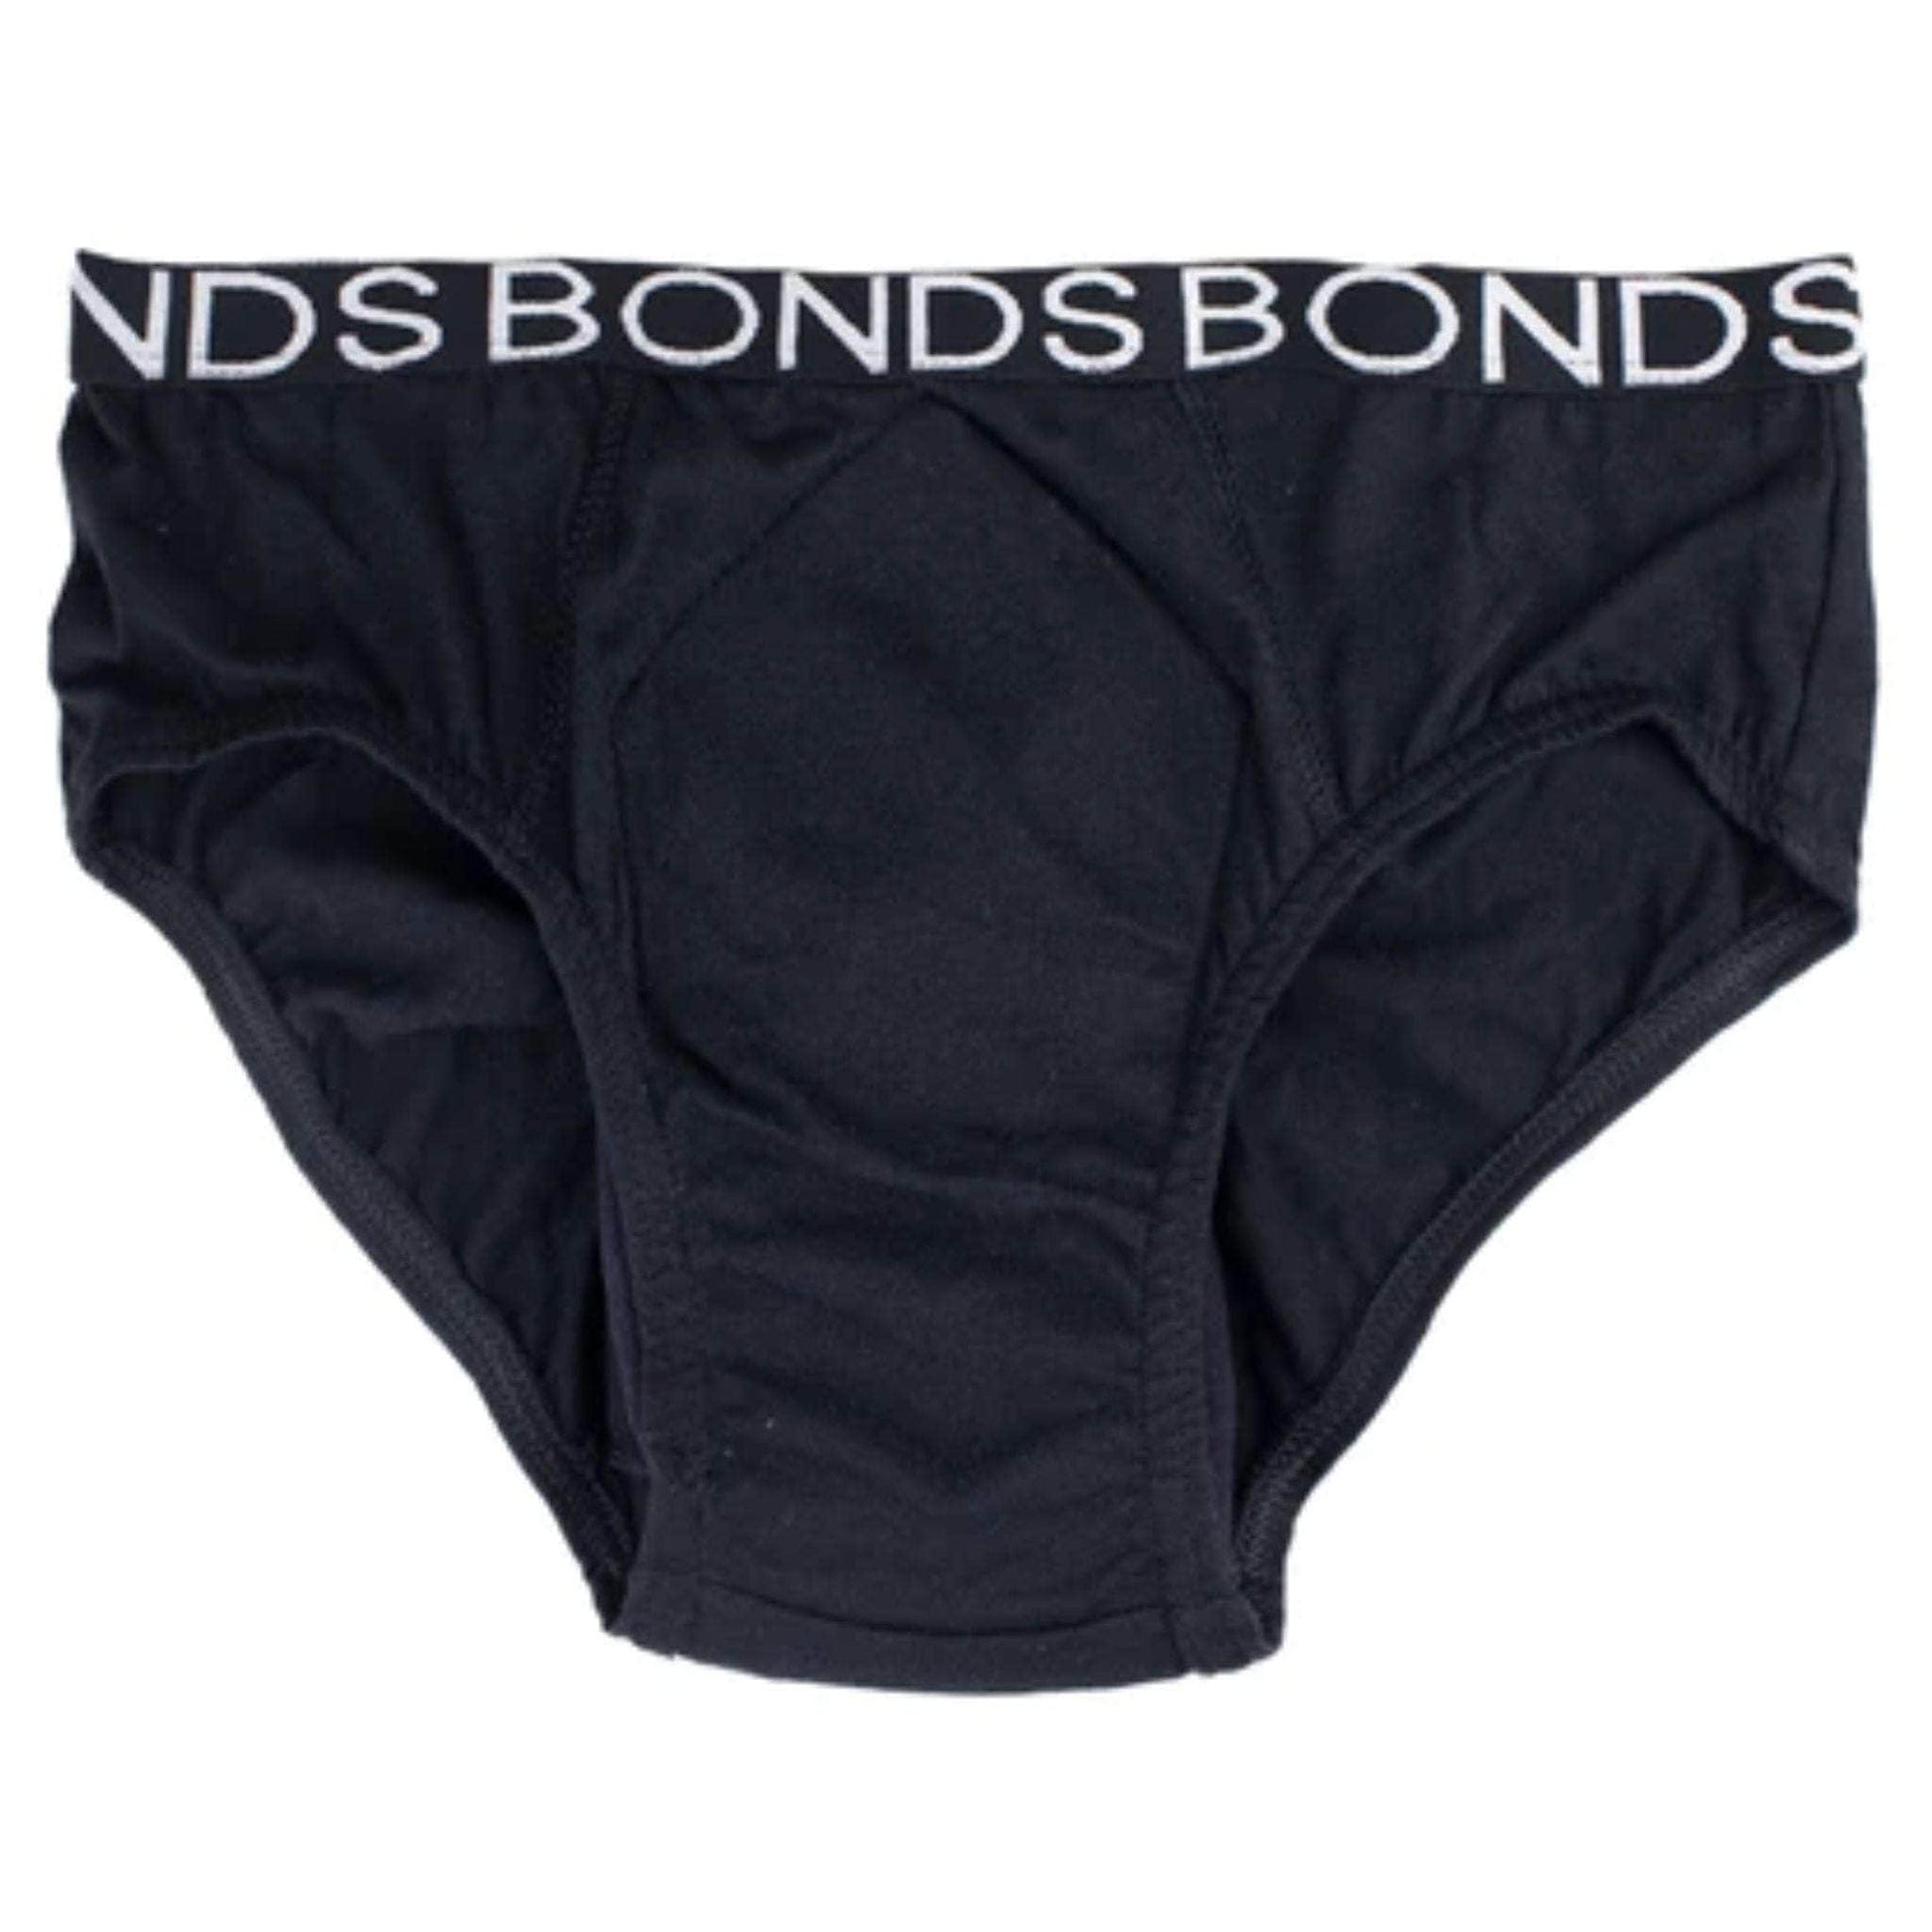 NND Boy's Bonds Hipster Incontinence Underwear - SINGLE - 400ml - Caring Clothing